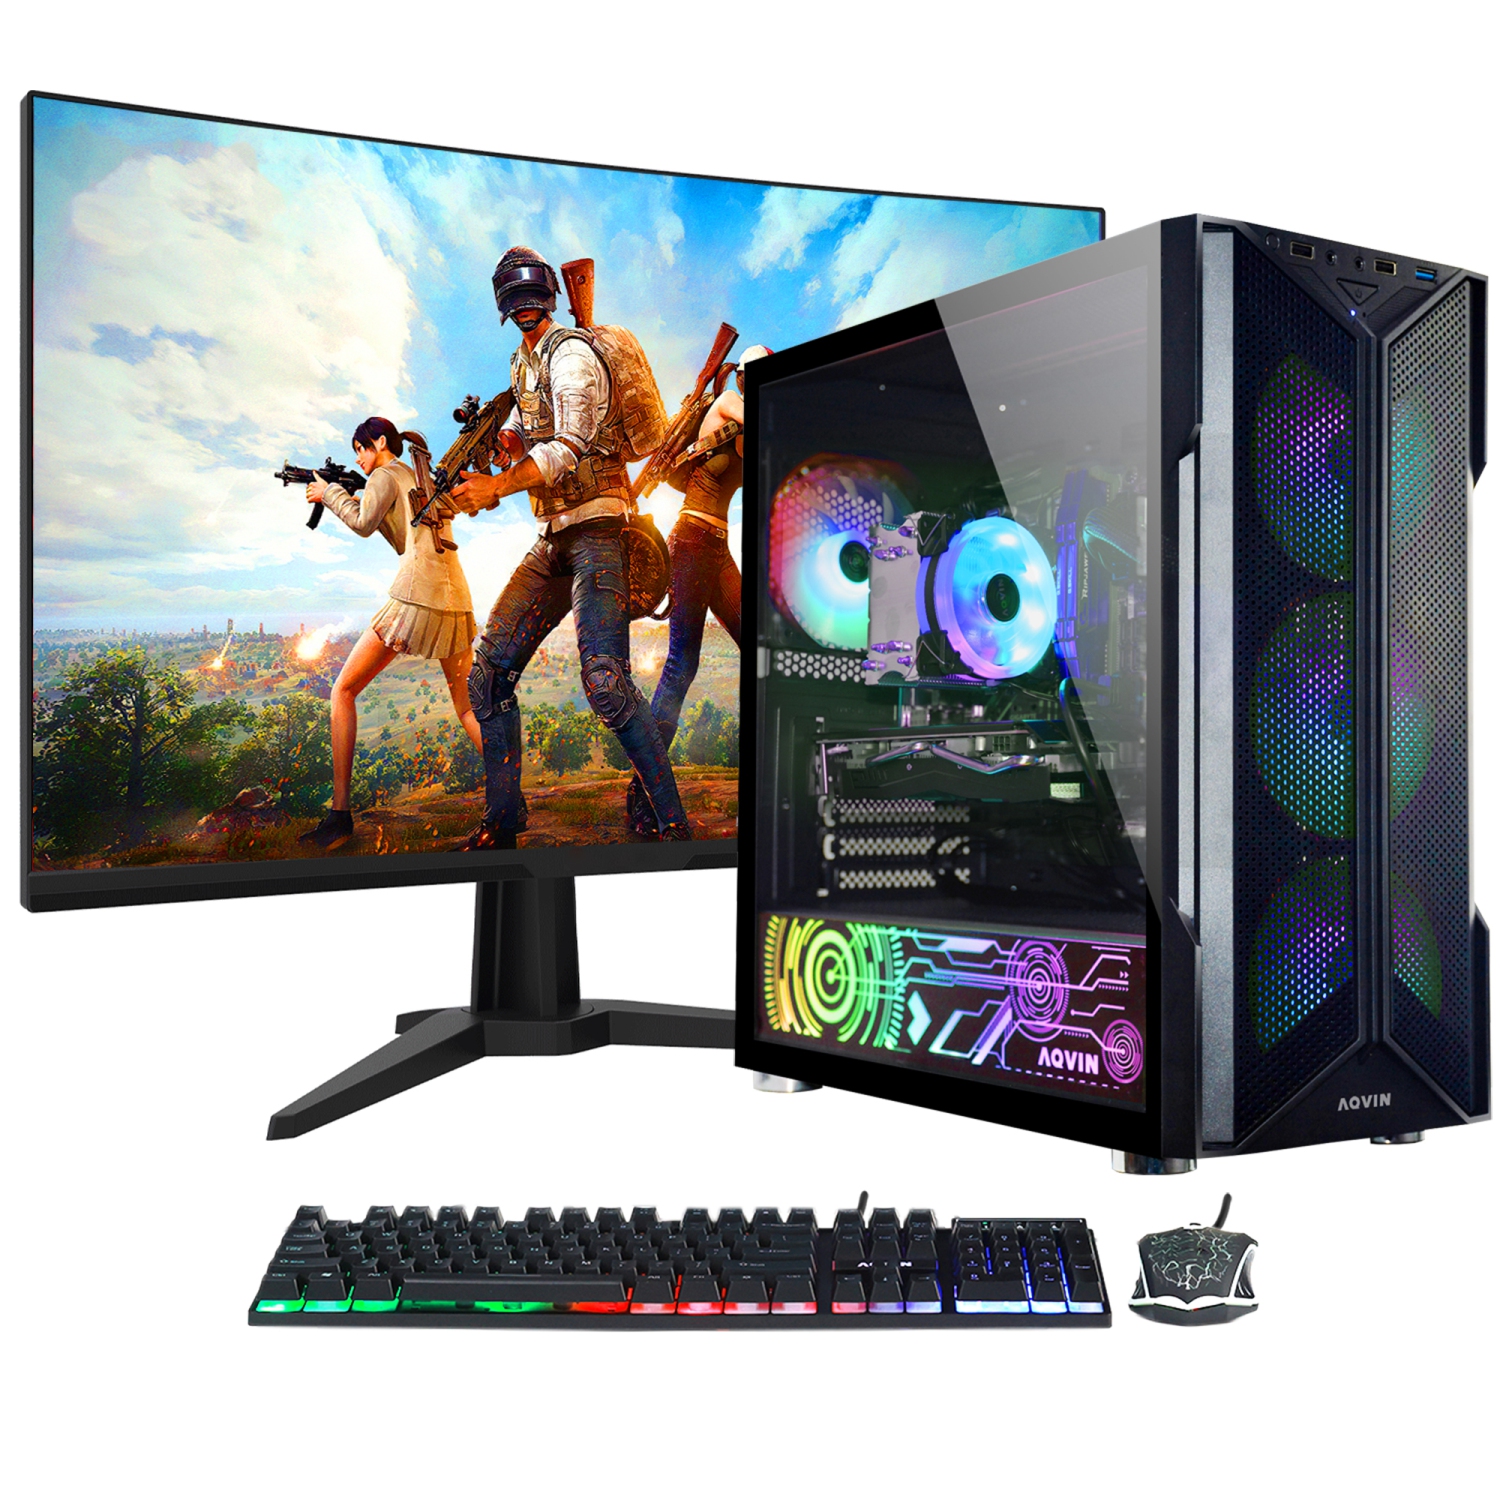 AQVIN-AQ20 Gaming PC Tower Desktop Computer Intel Core i7 up to 4.00 GHz 32GB DDR4 RAM 2TB SSD GeForce RTX 3050 8GB Windows 10 Pro New 24 inch Curved Gaming Monitor